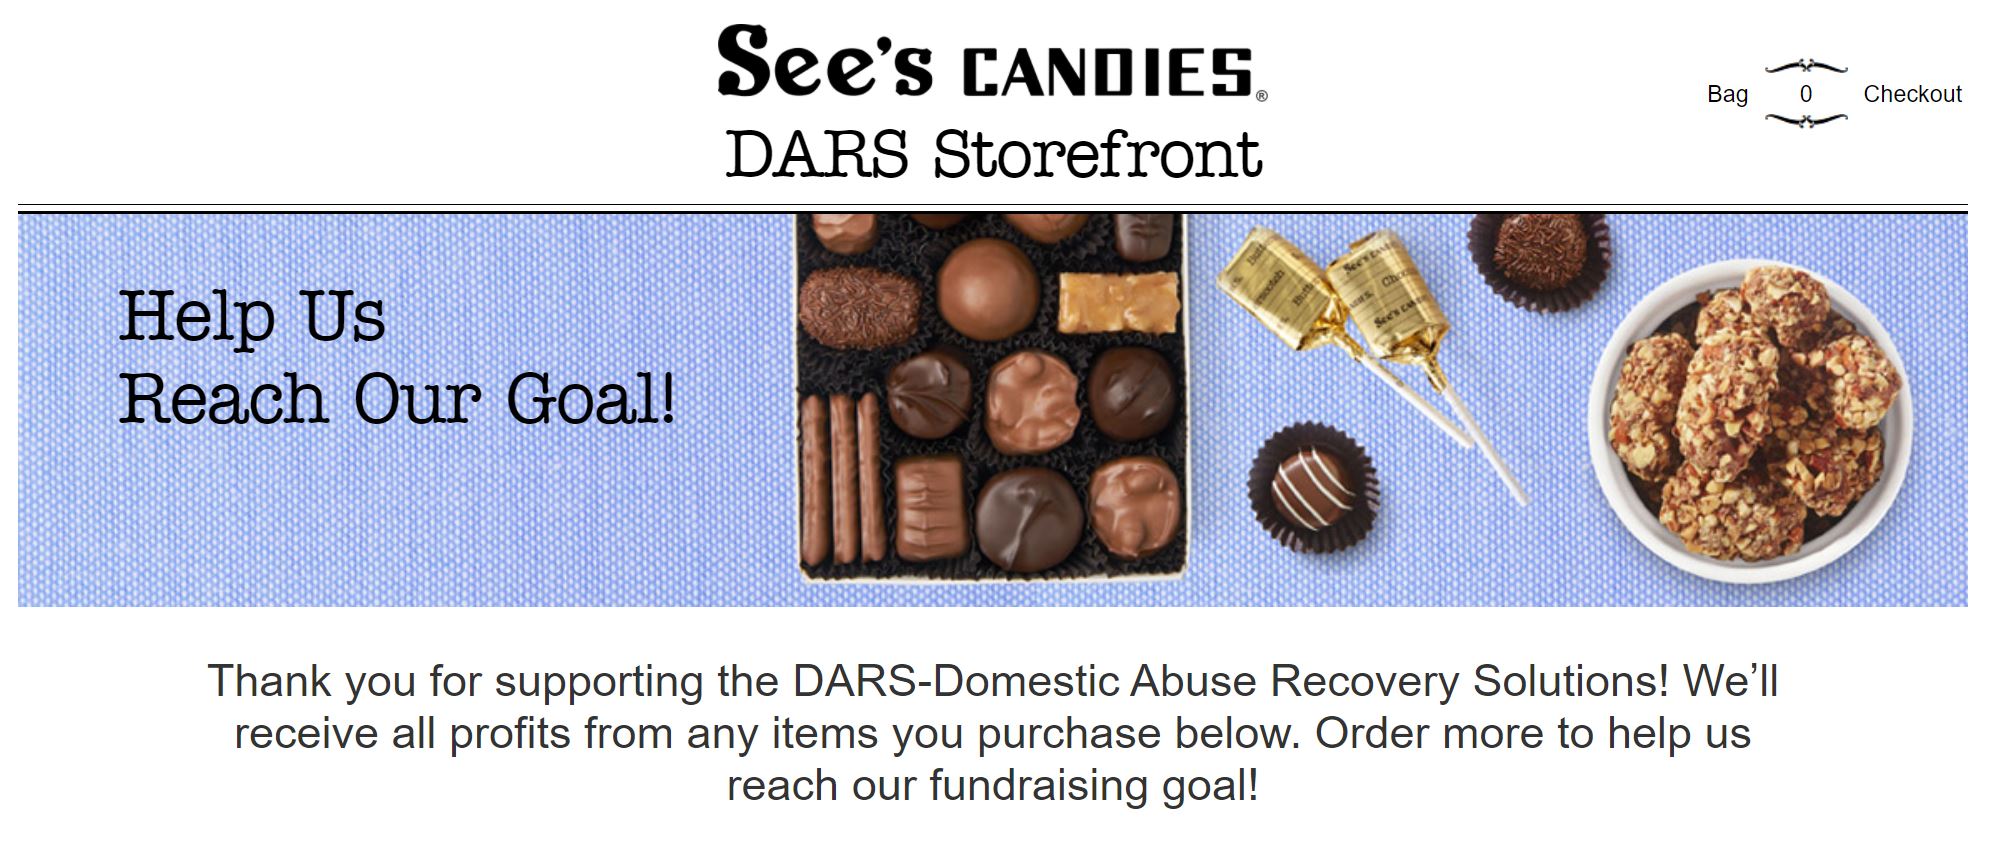 See's Candies - DARS Storefront